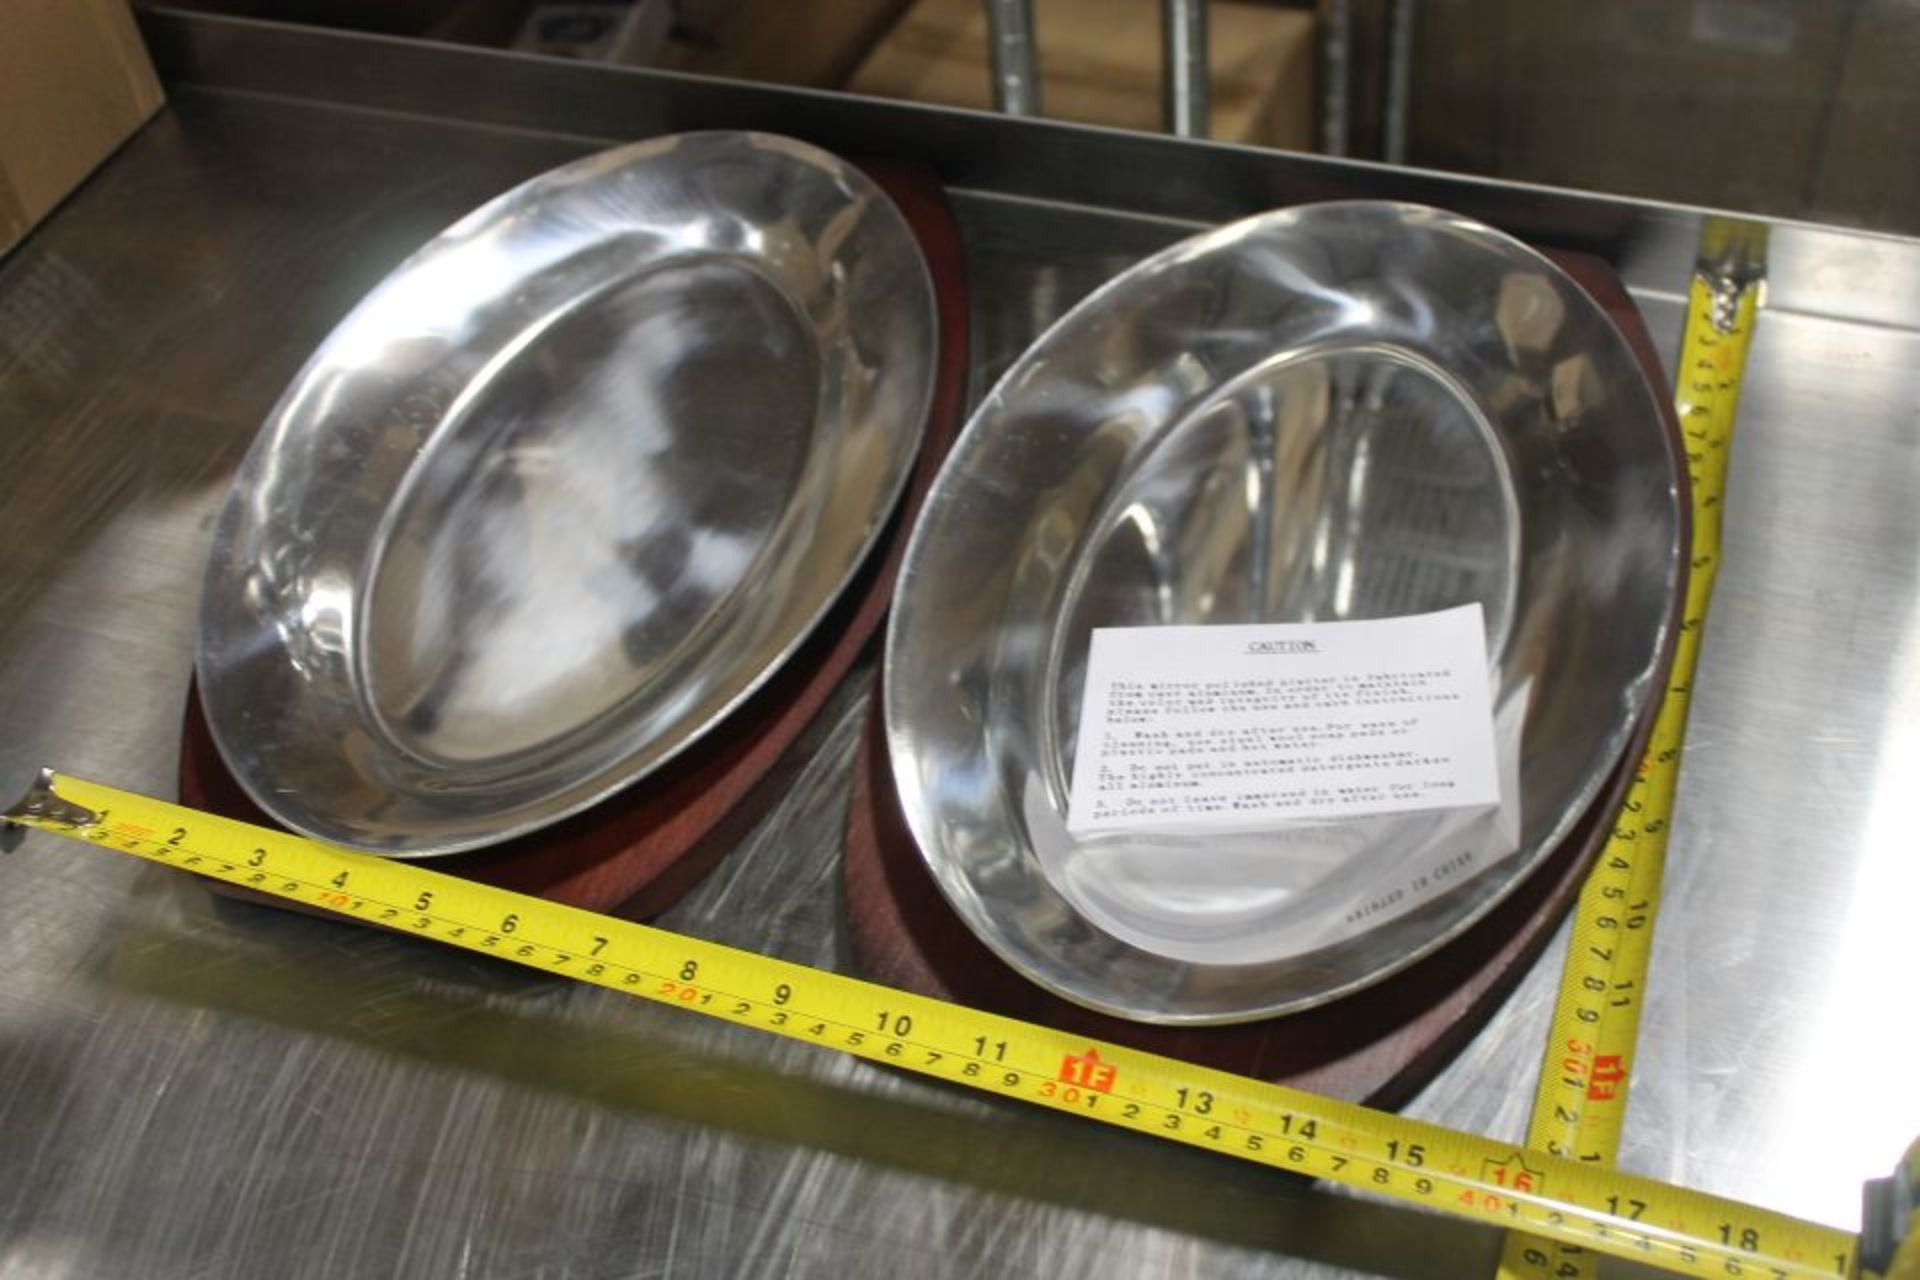 12" Sizzle Platters with Wooden Holders - Lot of 2